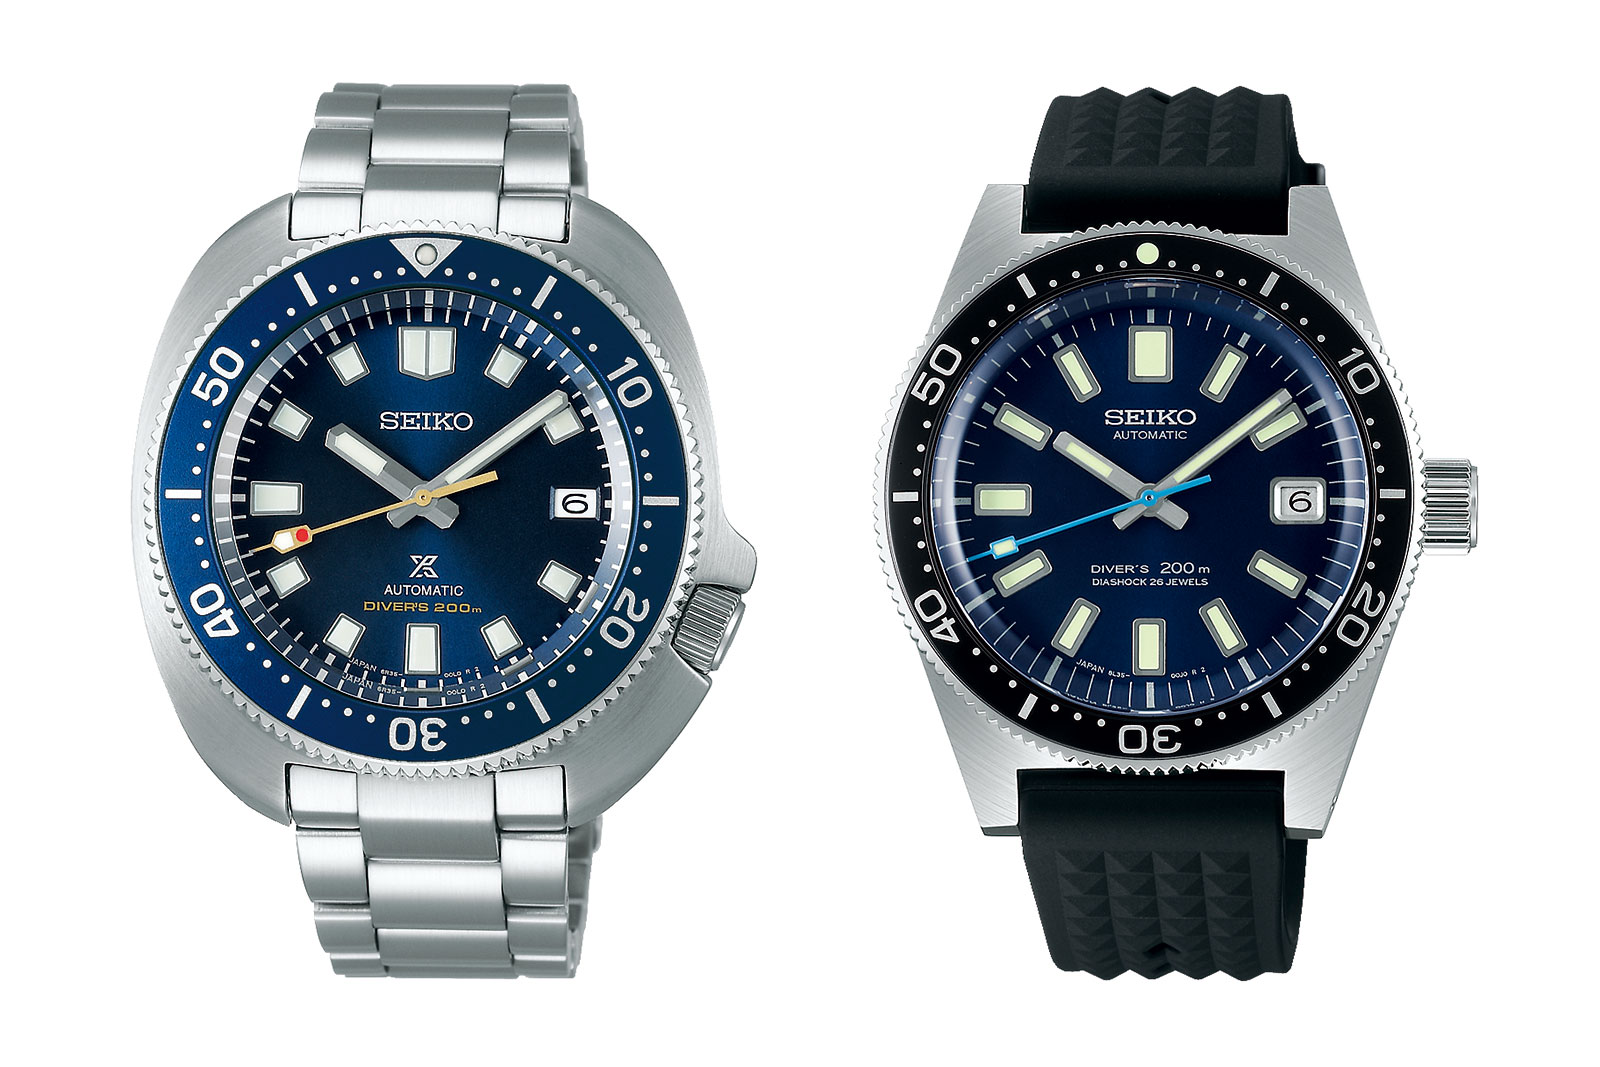 Seiko Introduces the Diver's Watch 55th Anniversary “62MAS” and “6105” |  SJX Watches